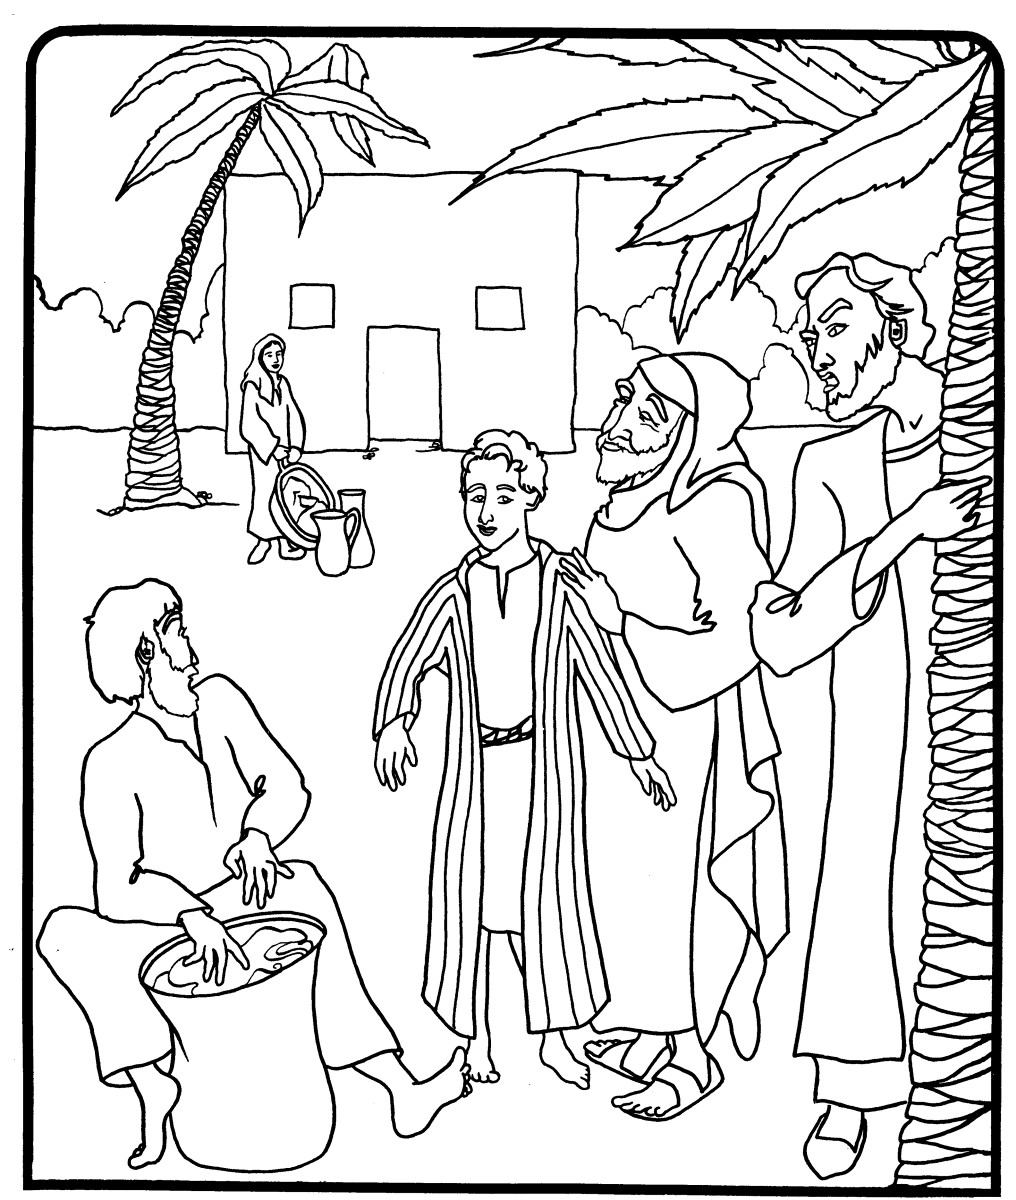 Joseph Bible Coloring Page at GetColorings.com | Free ...